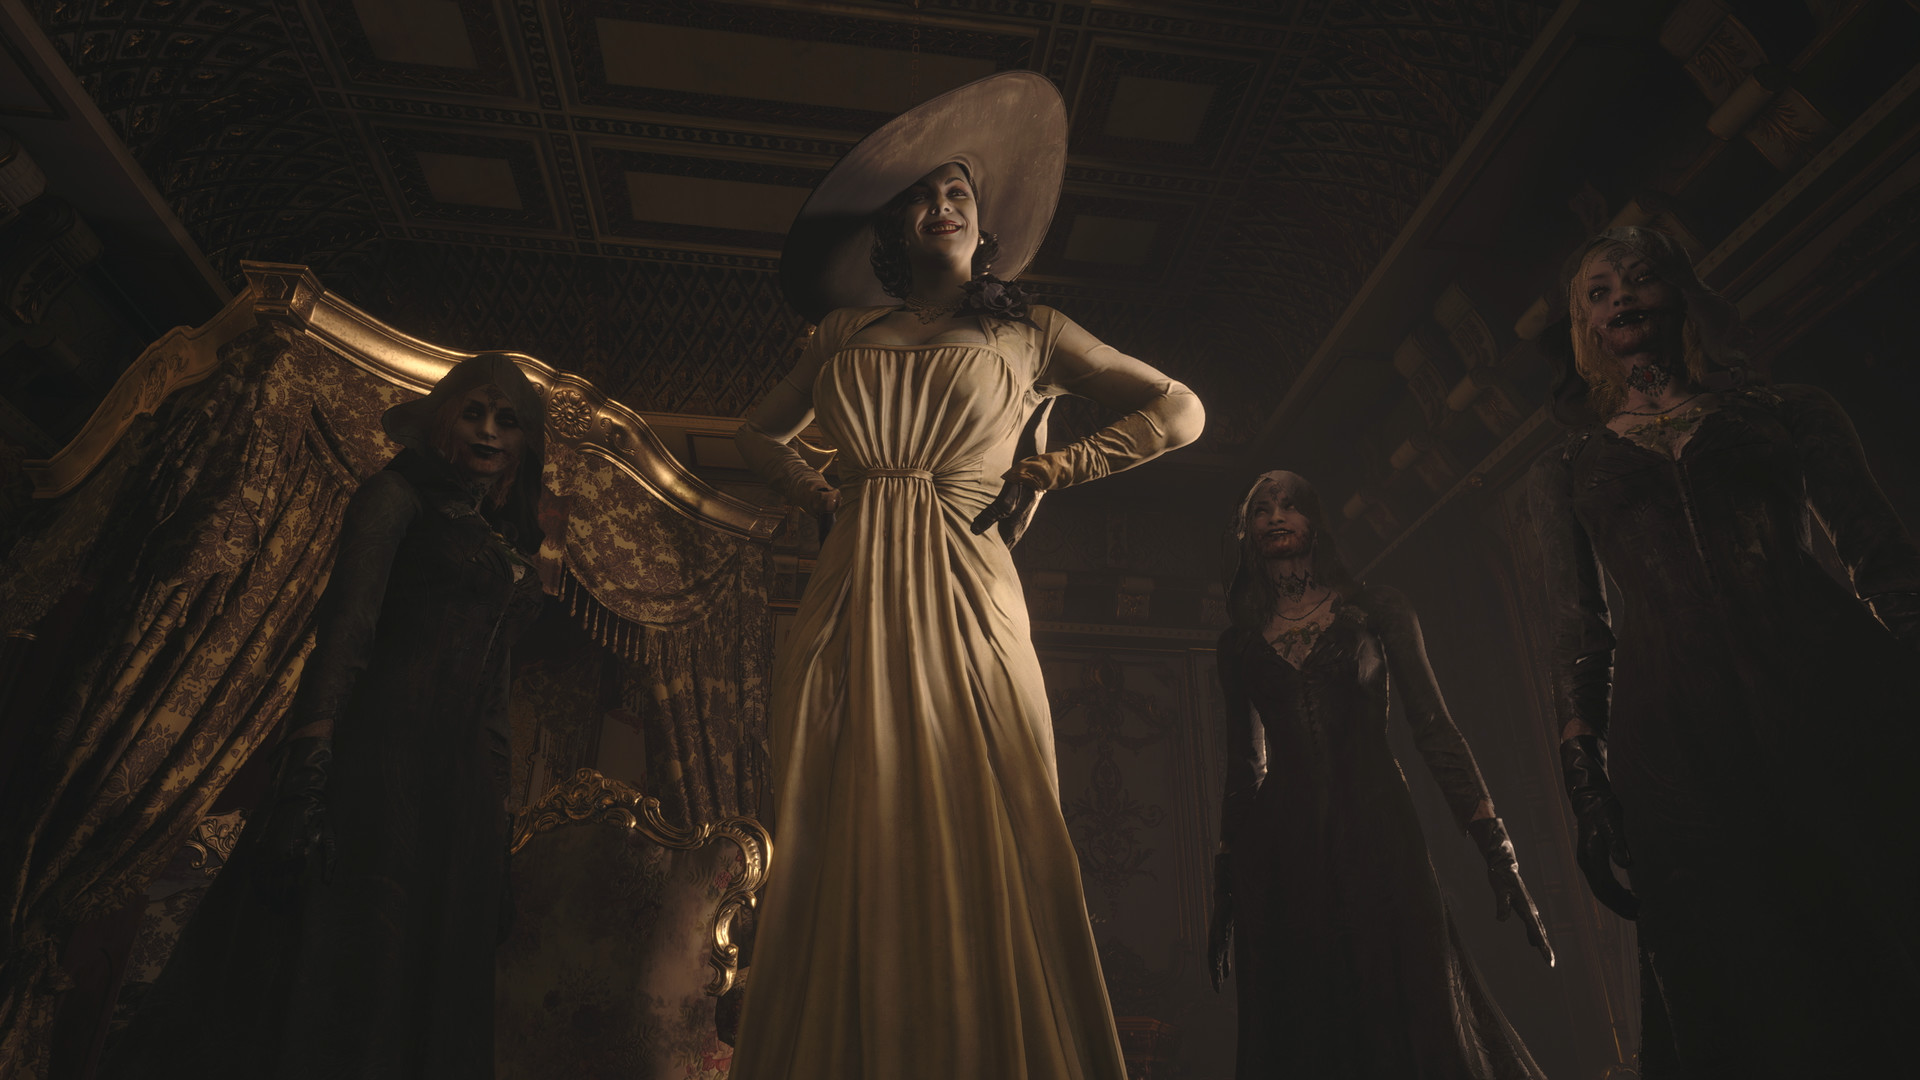 Resident Evil 8's Lady Alcina Dimitrescu and her daughters